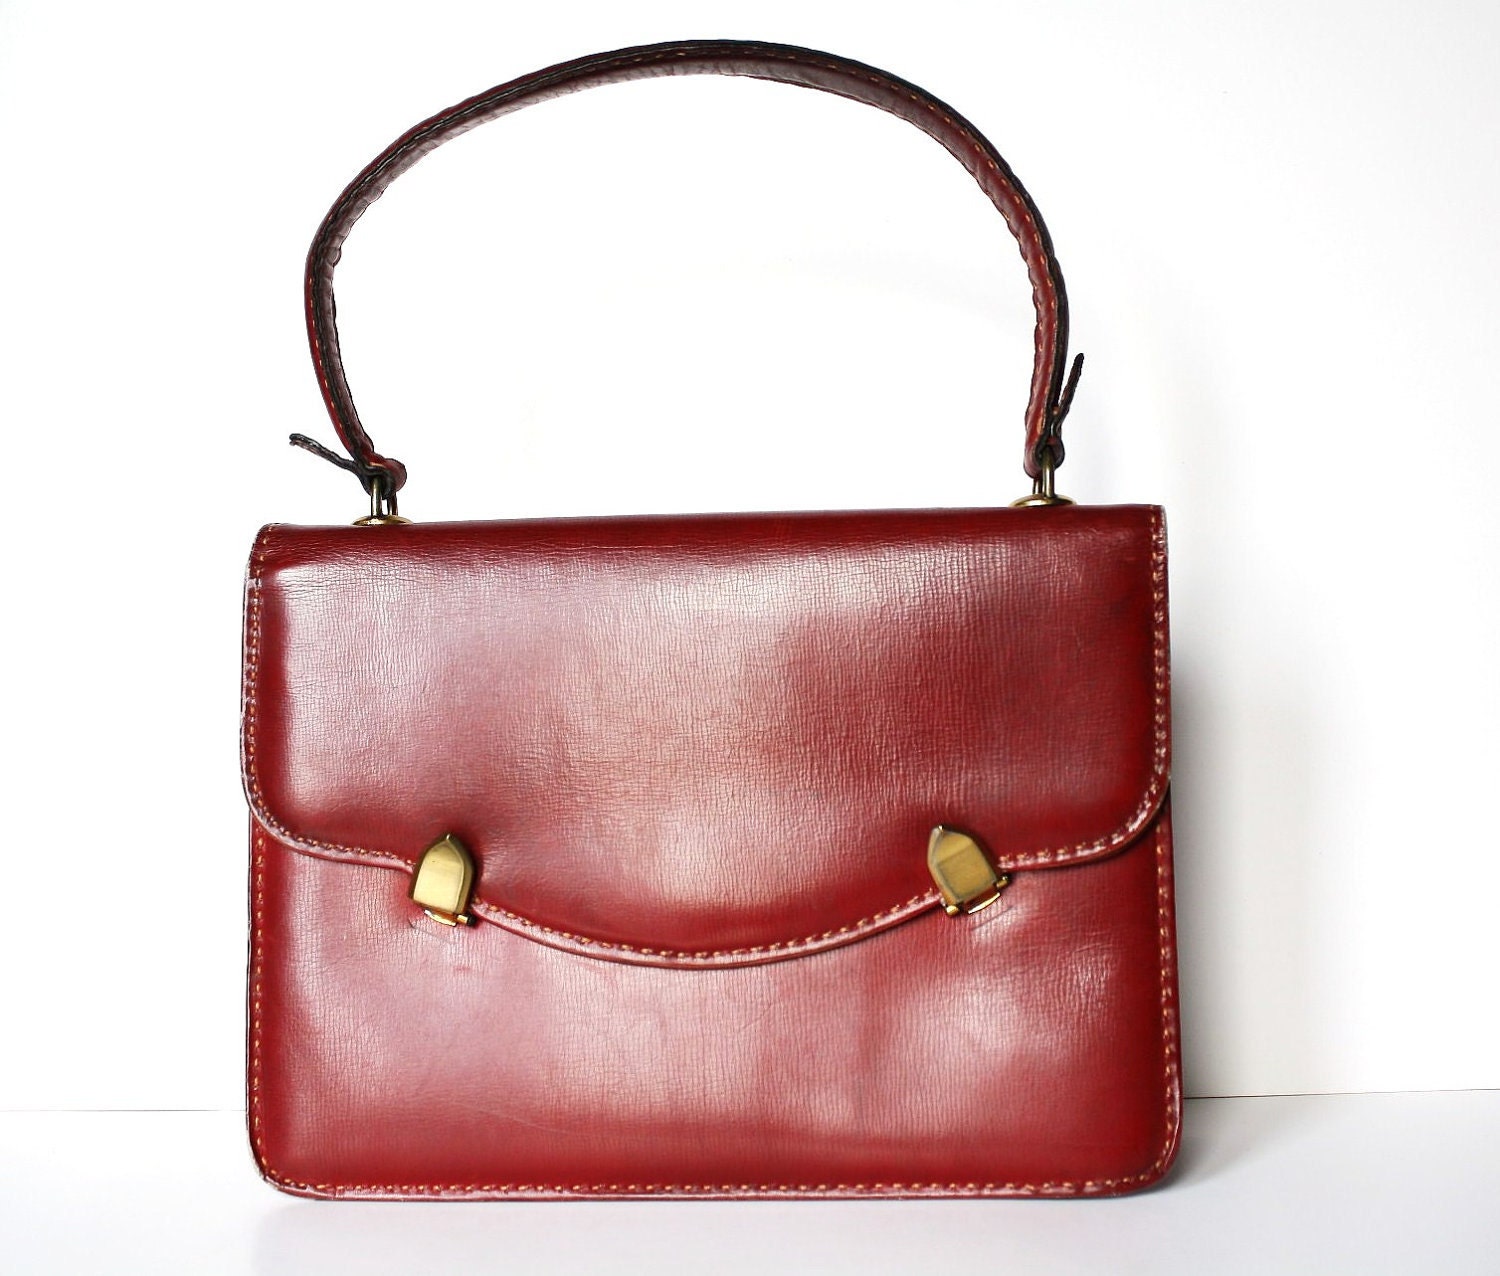 So lovely | Red leather handbags, Red handbag, Leather